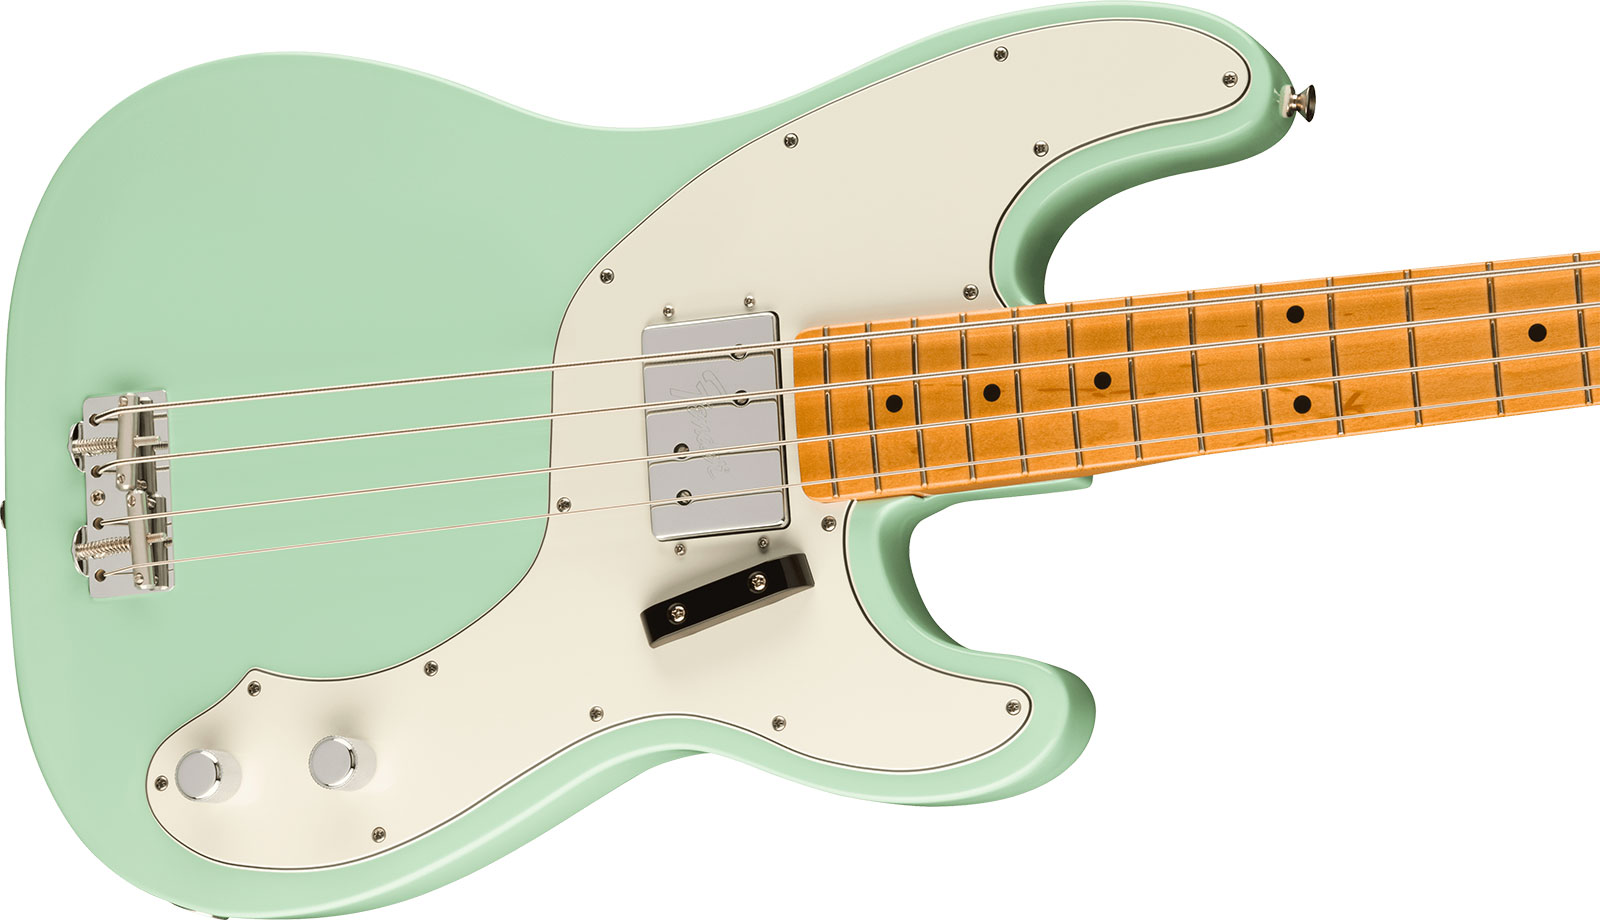 Fender Tele Bass 70s Vintera 2 Mex Mn - Surf Green - Solid body electric bass - Variation 2